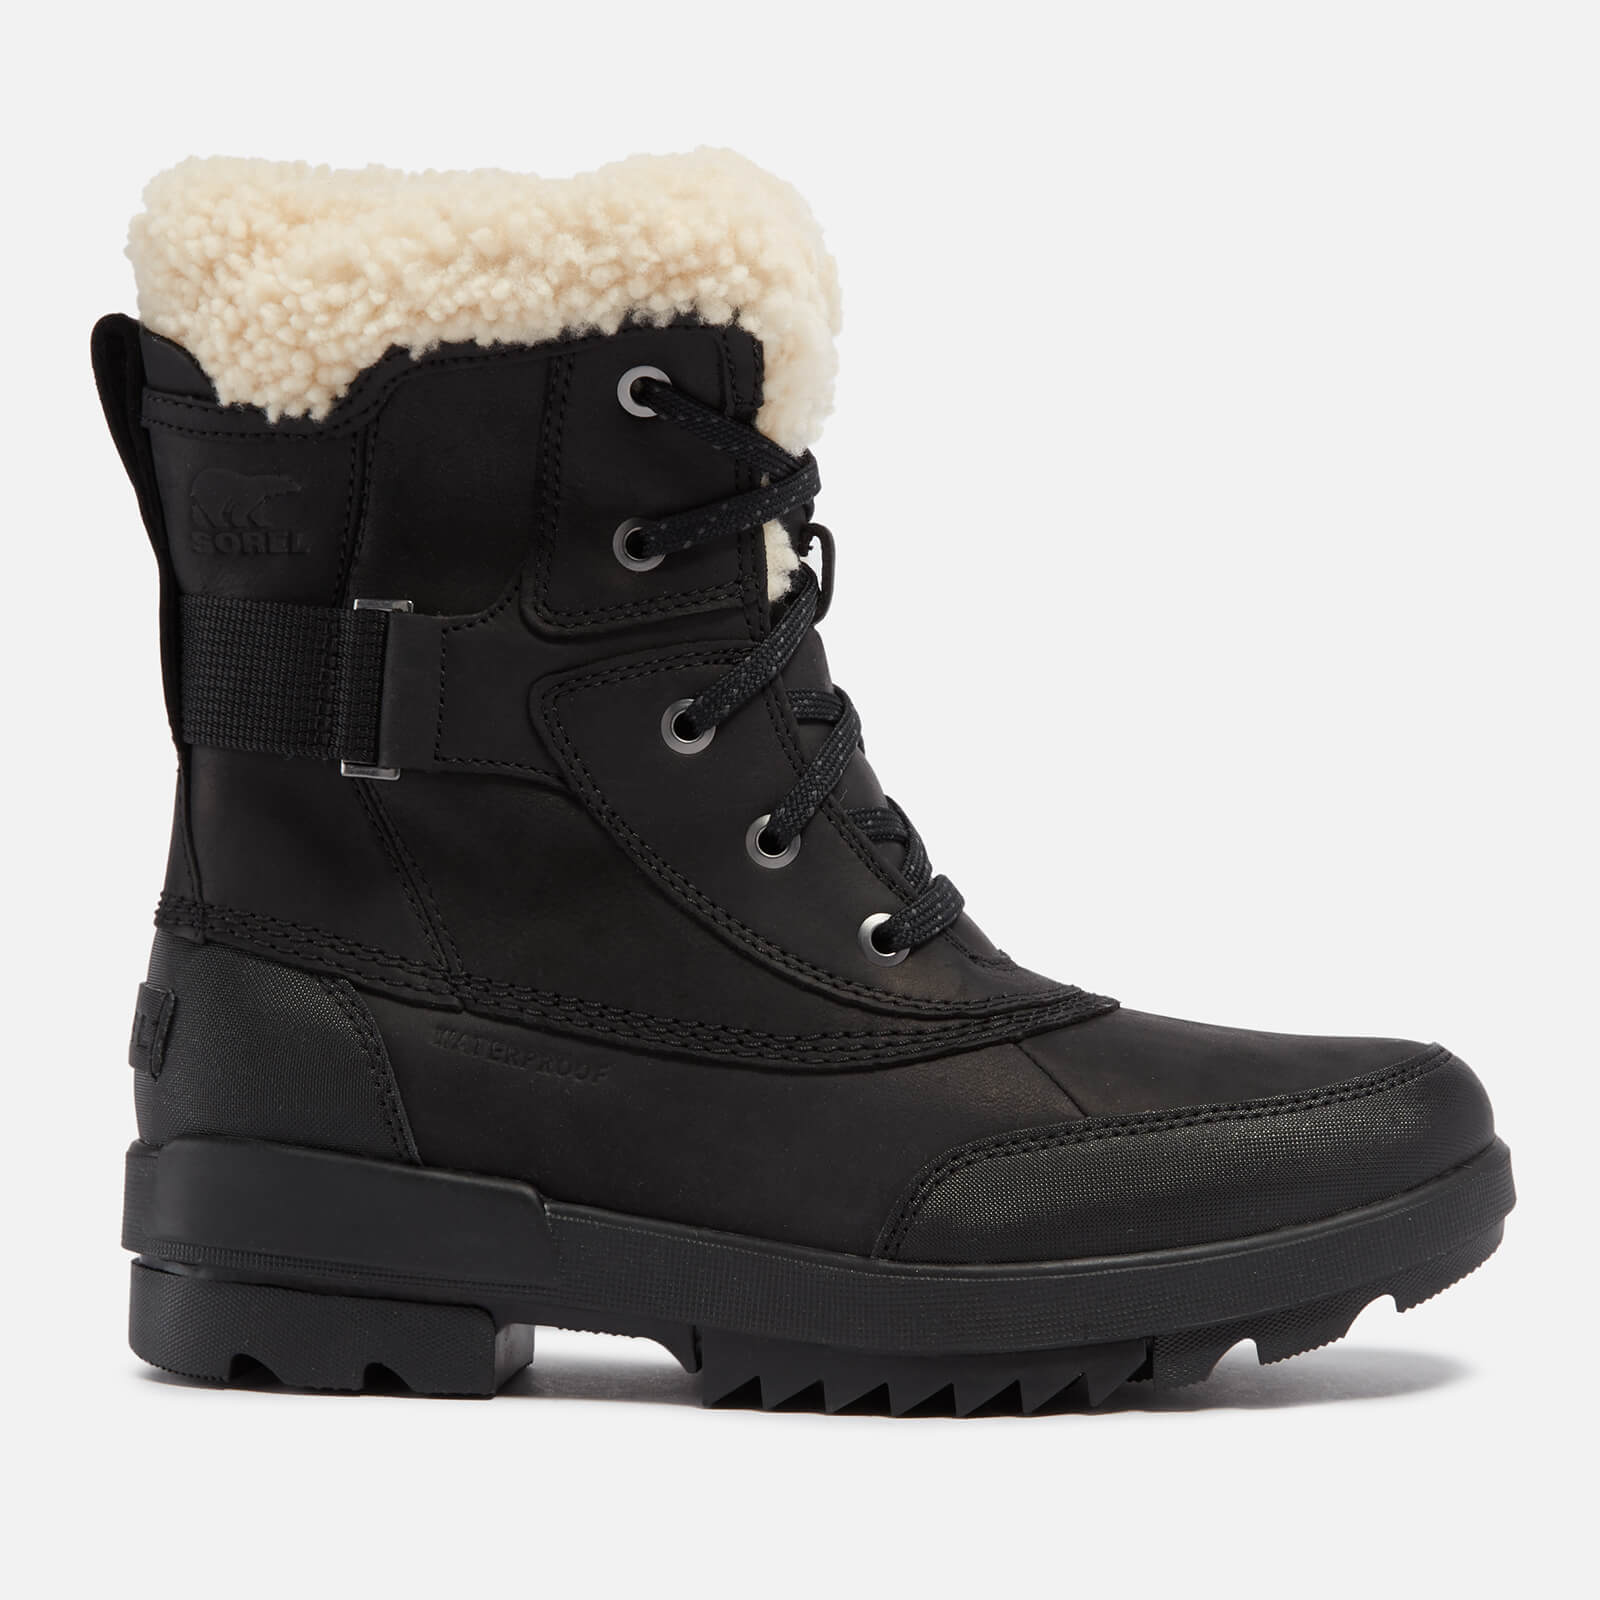 Sorel Torino Ii Parc Shearling, Rubber and Leather Boots - UK 5 von Sorel